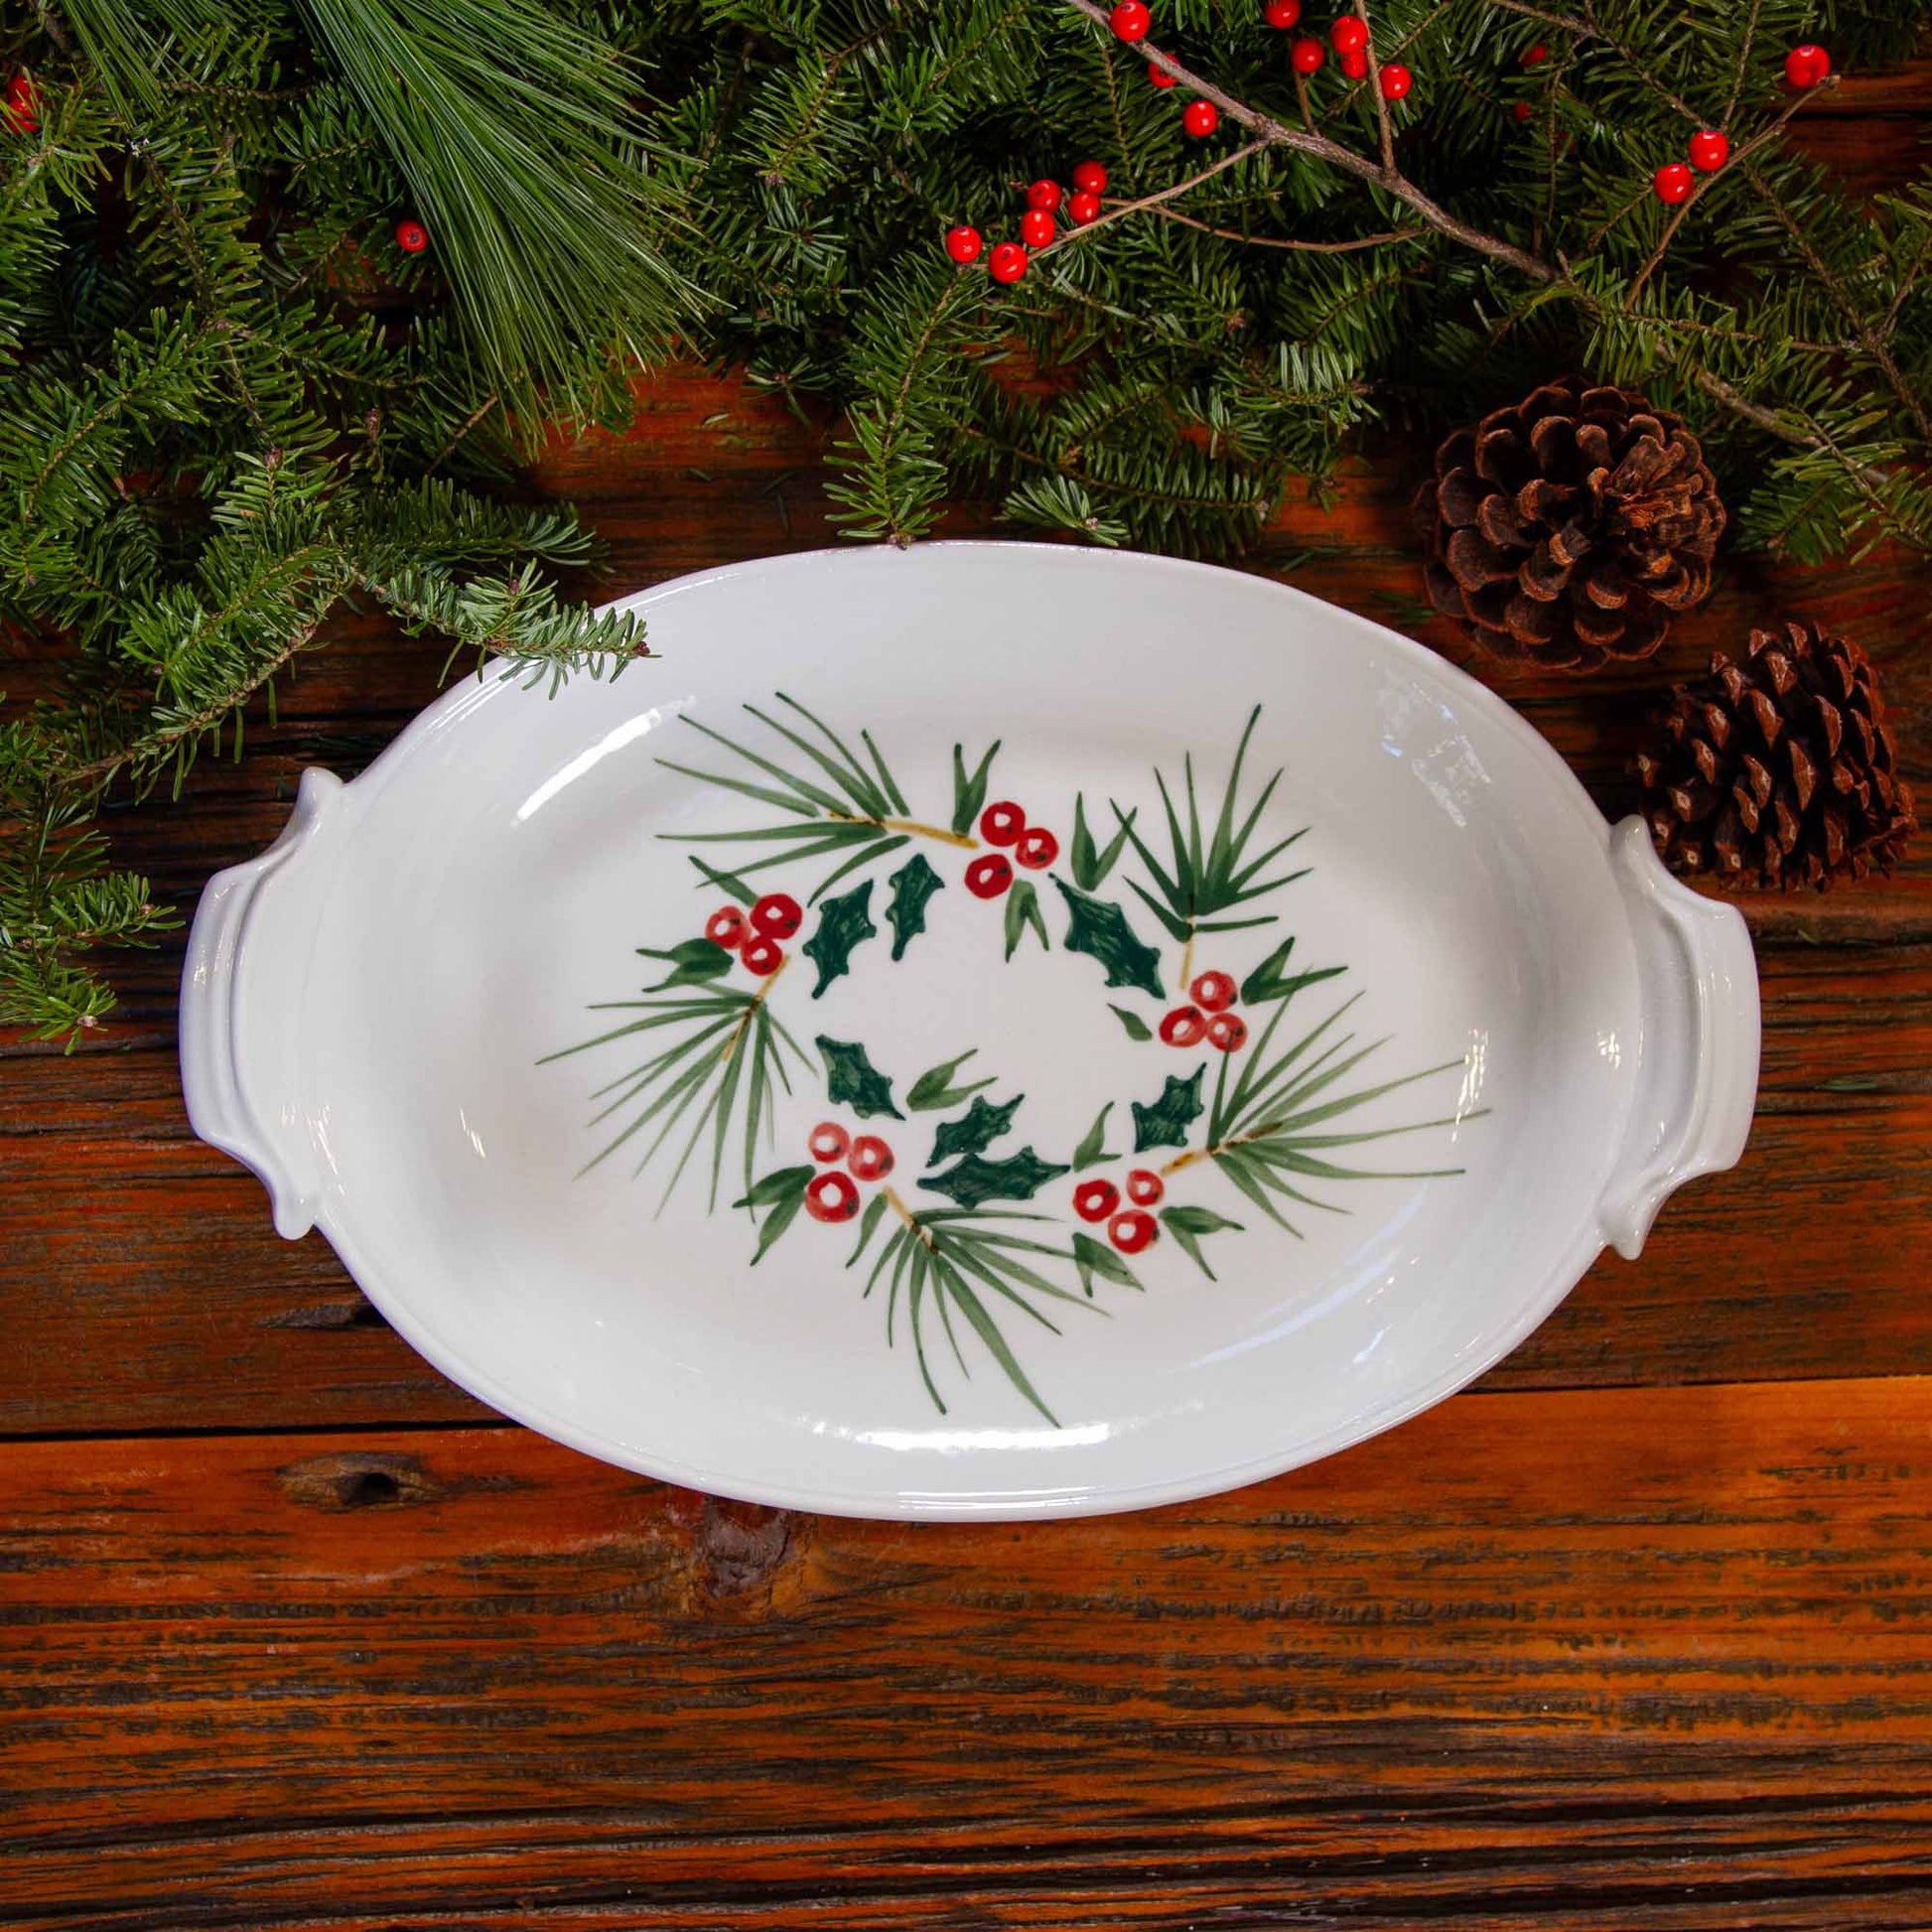 Oval Tray in Brushwork Winterberry & Holly Wreath